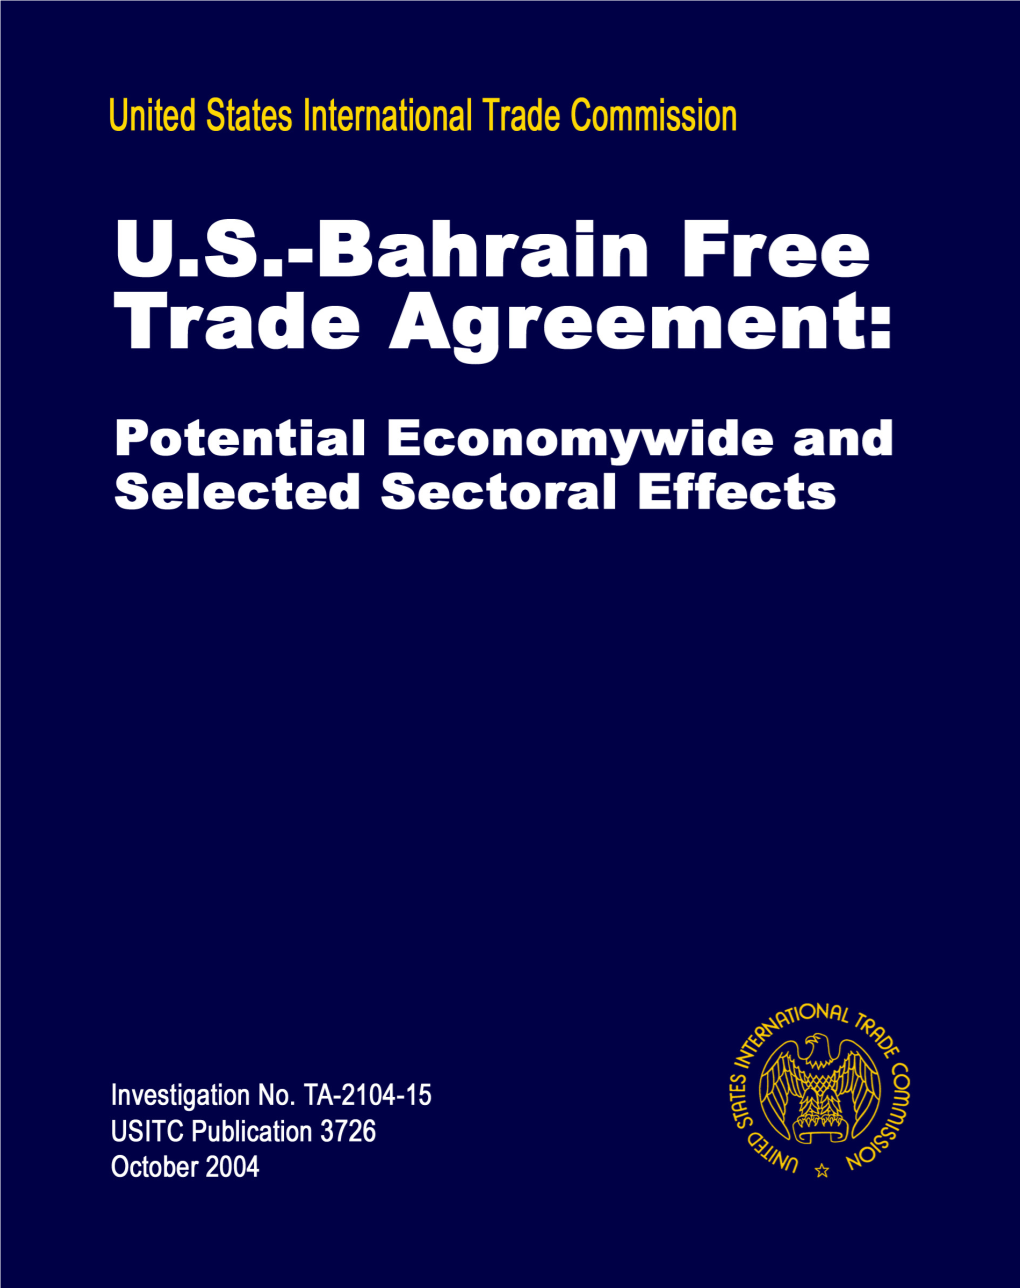 U.S.-Bahrain Free Trade Agreement: Potential Economywide and Selected Sectoral Effects